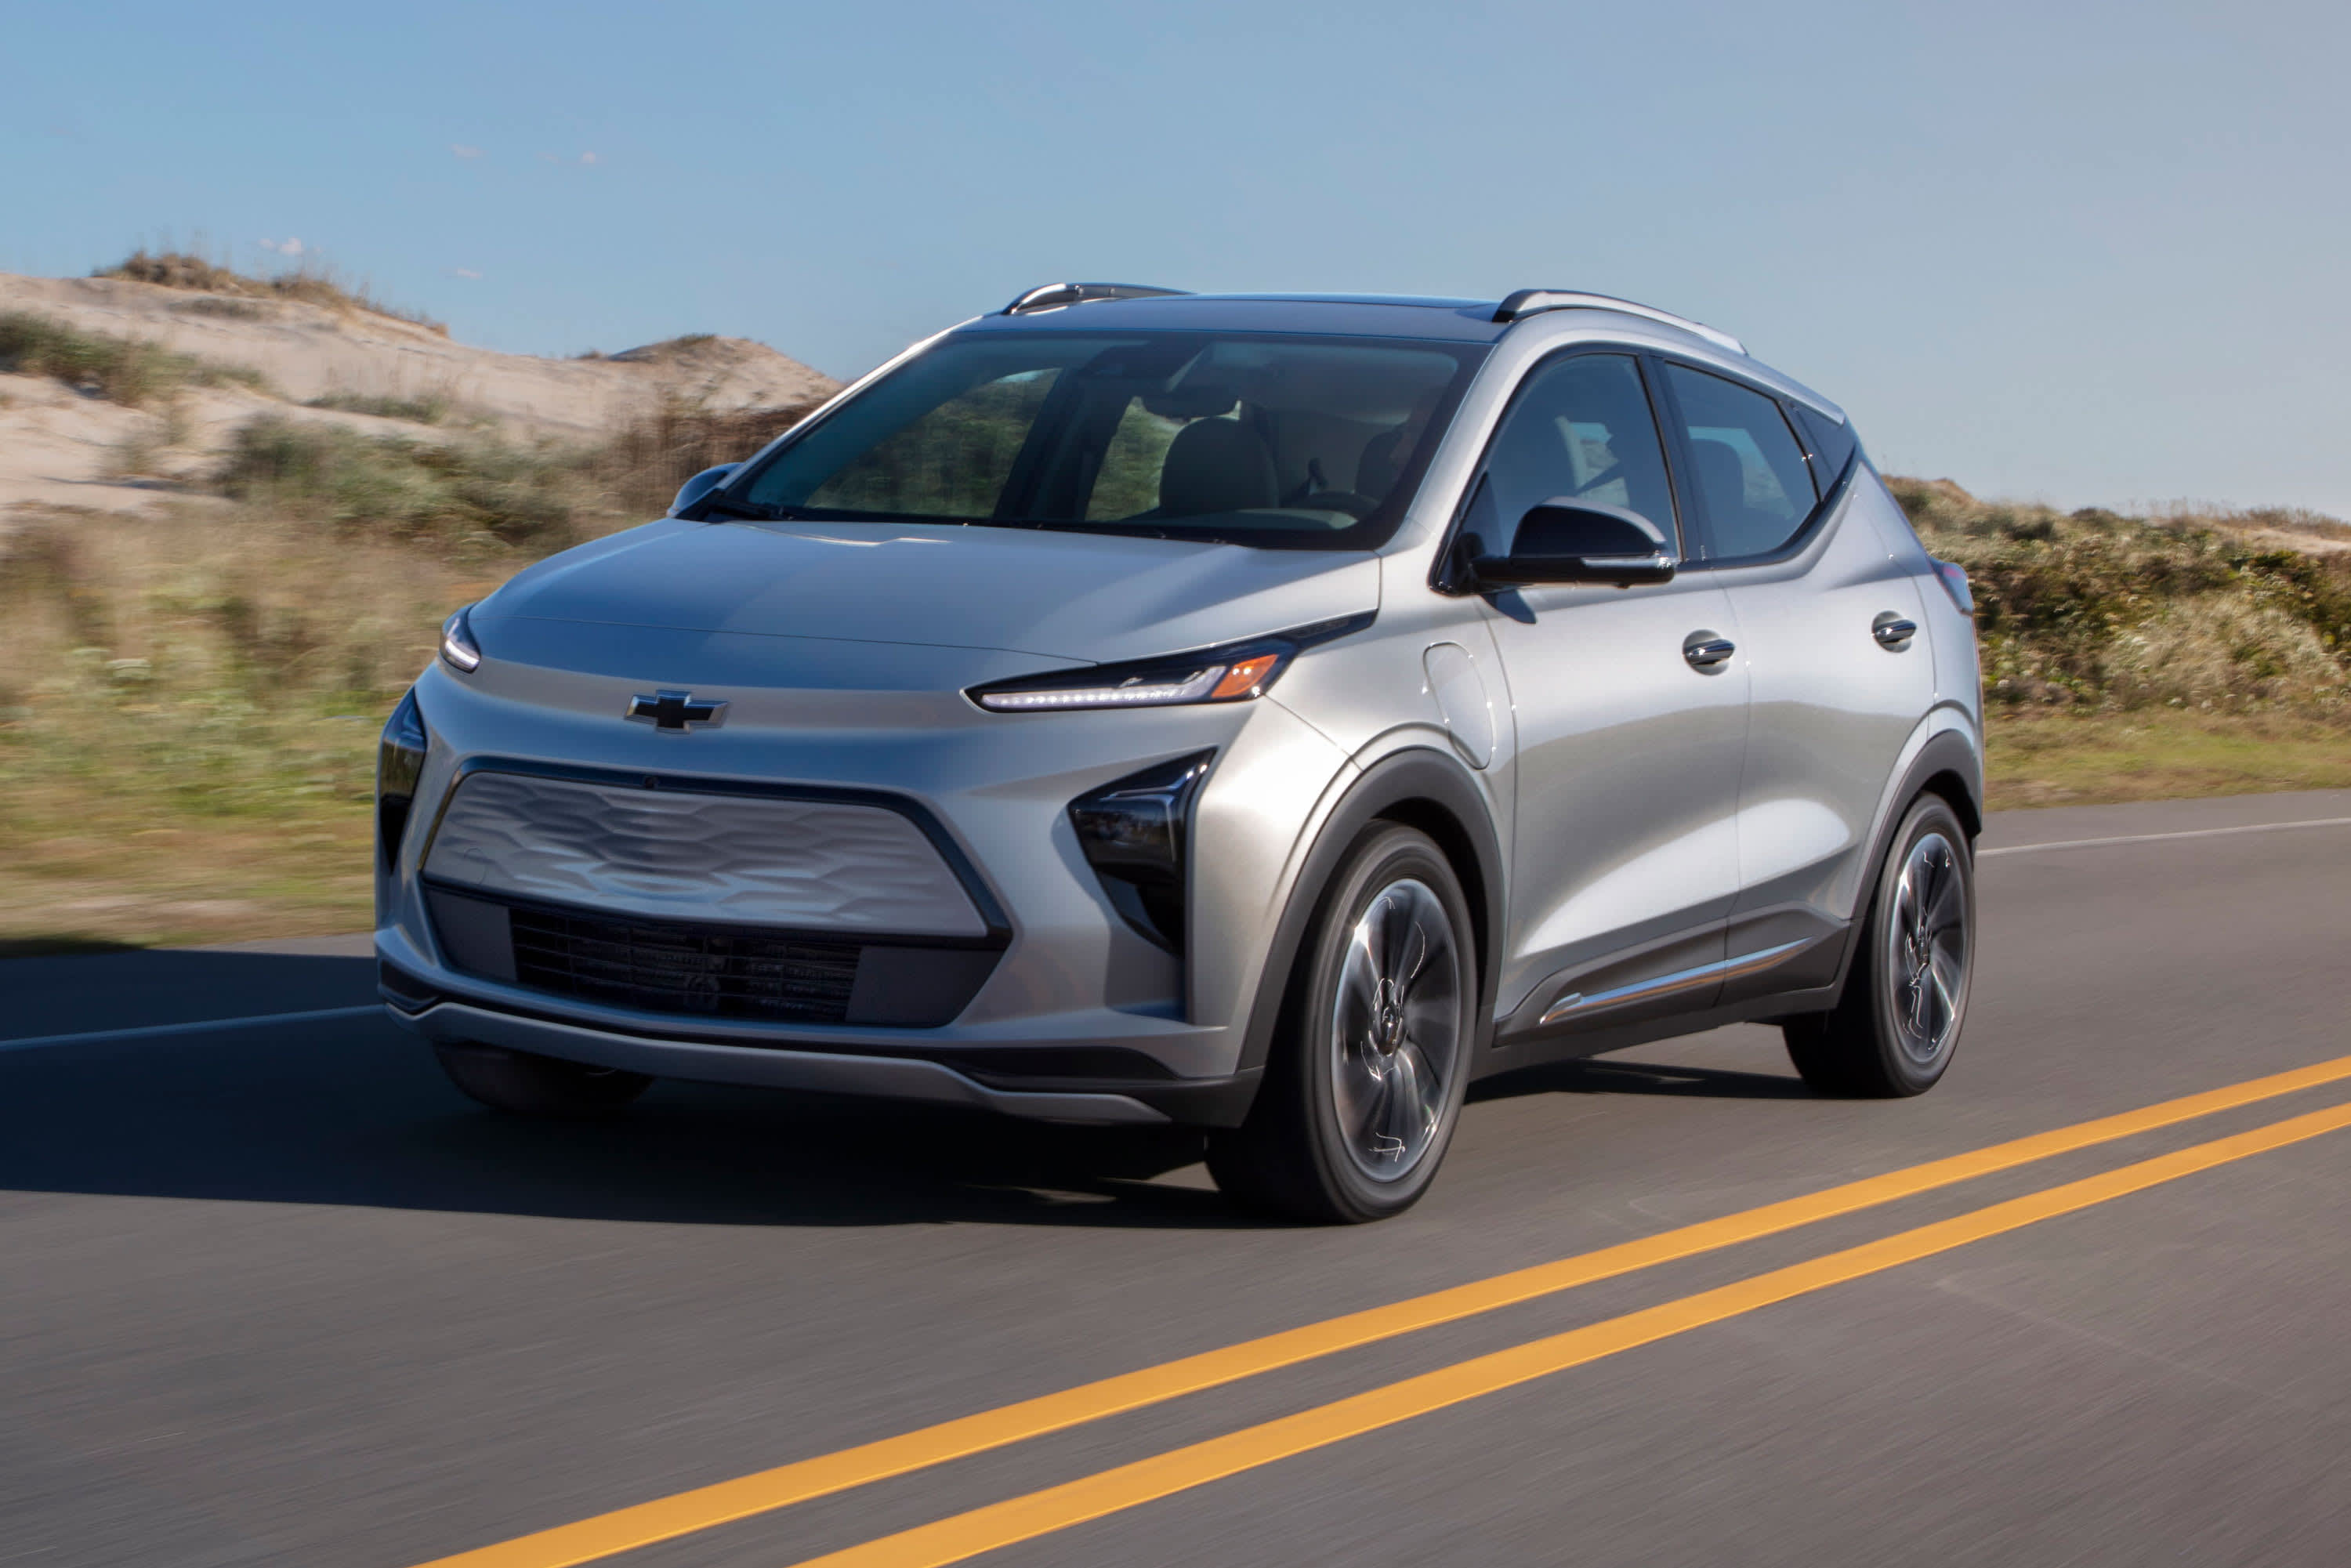 GM’s EV plans are beginning to take into account the new Chevy screws at lower prices